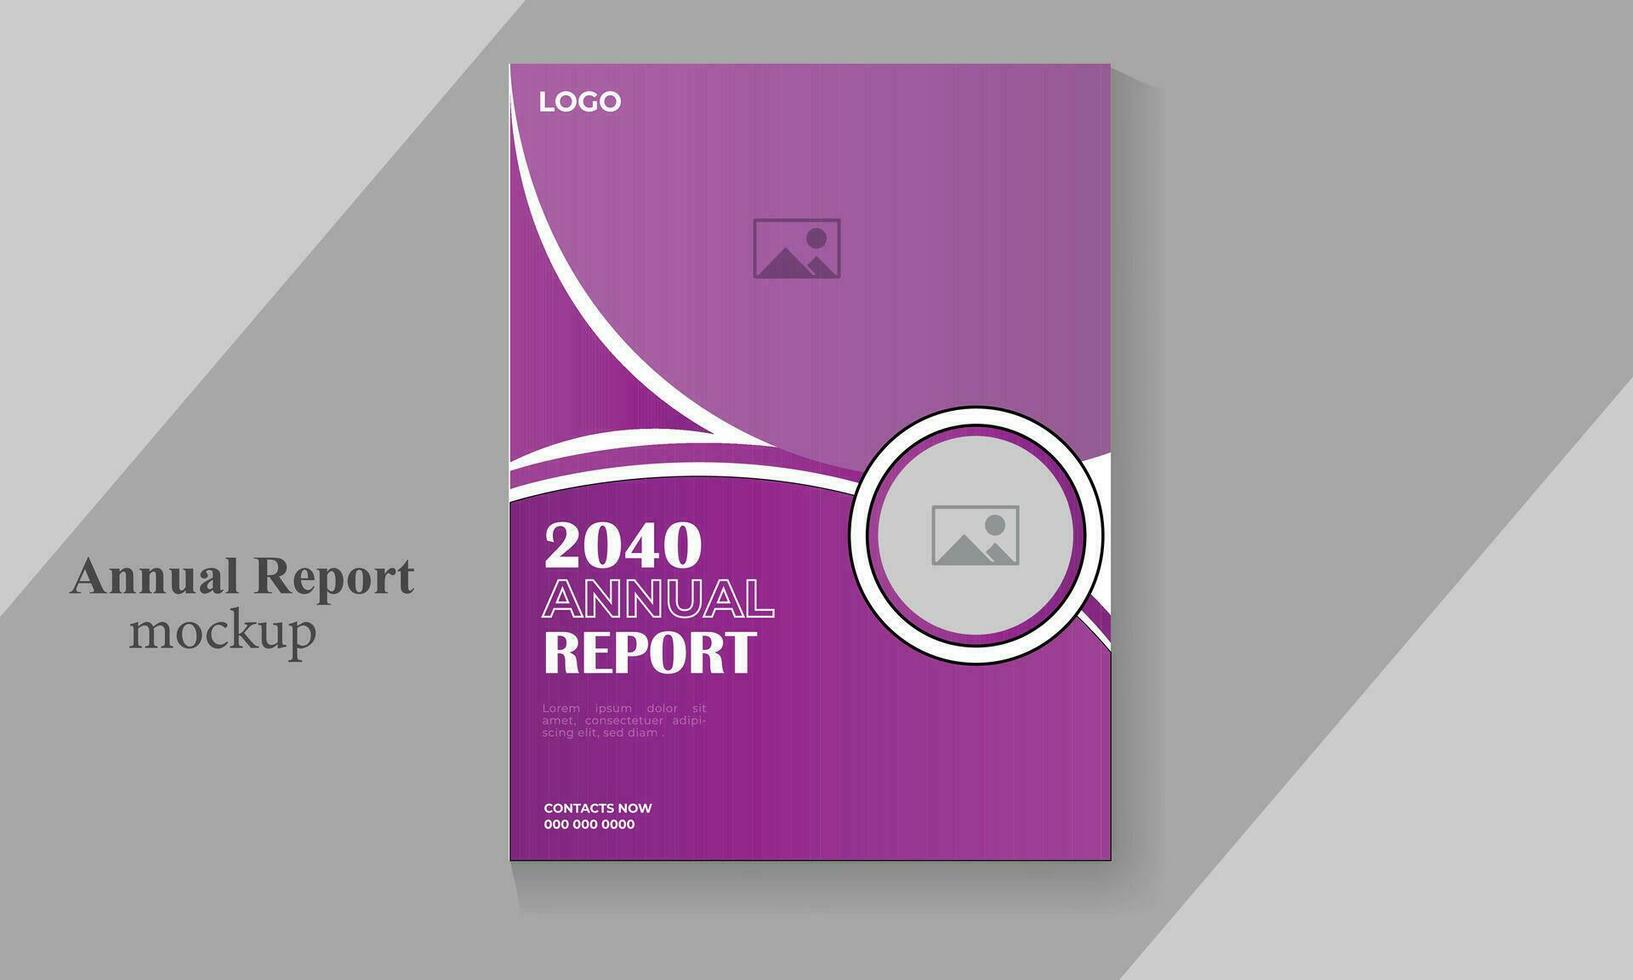 Modern company annual report  flyer template vector